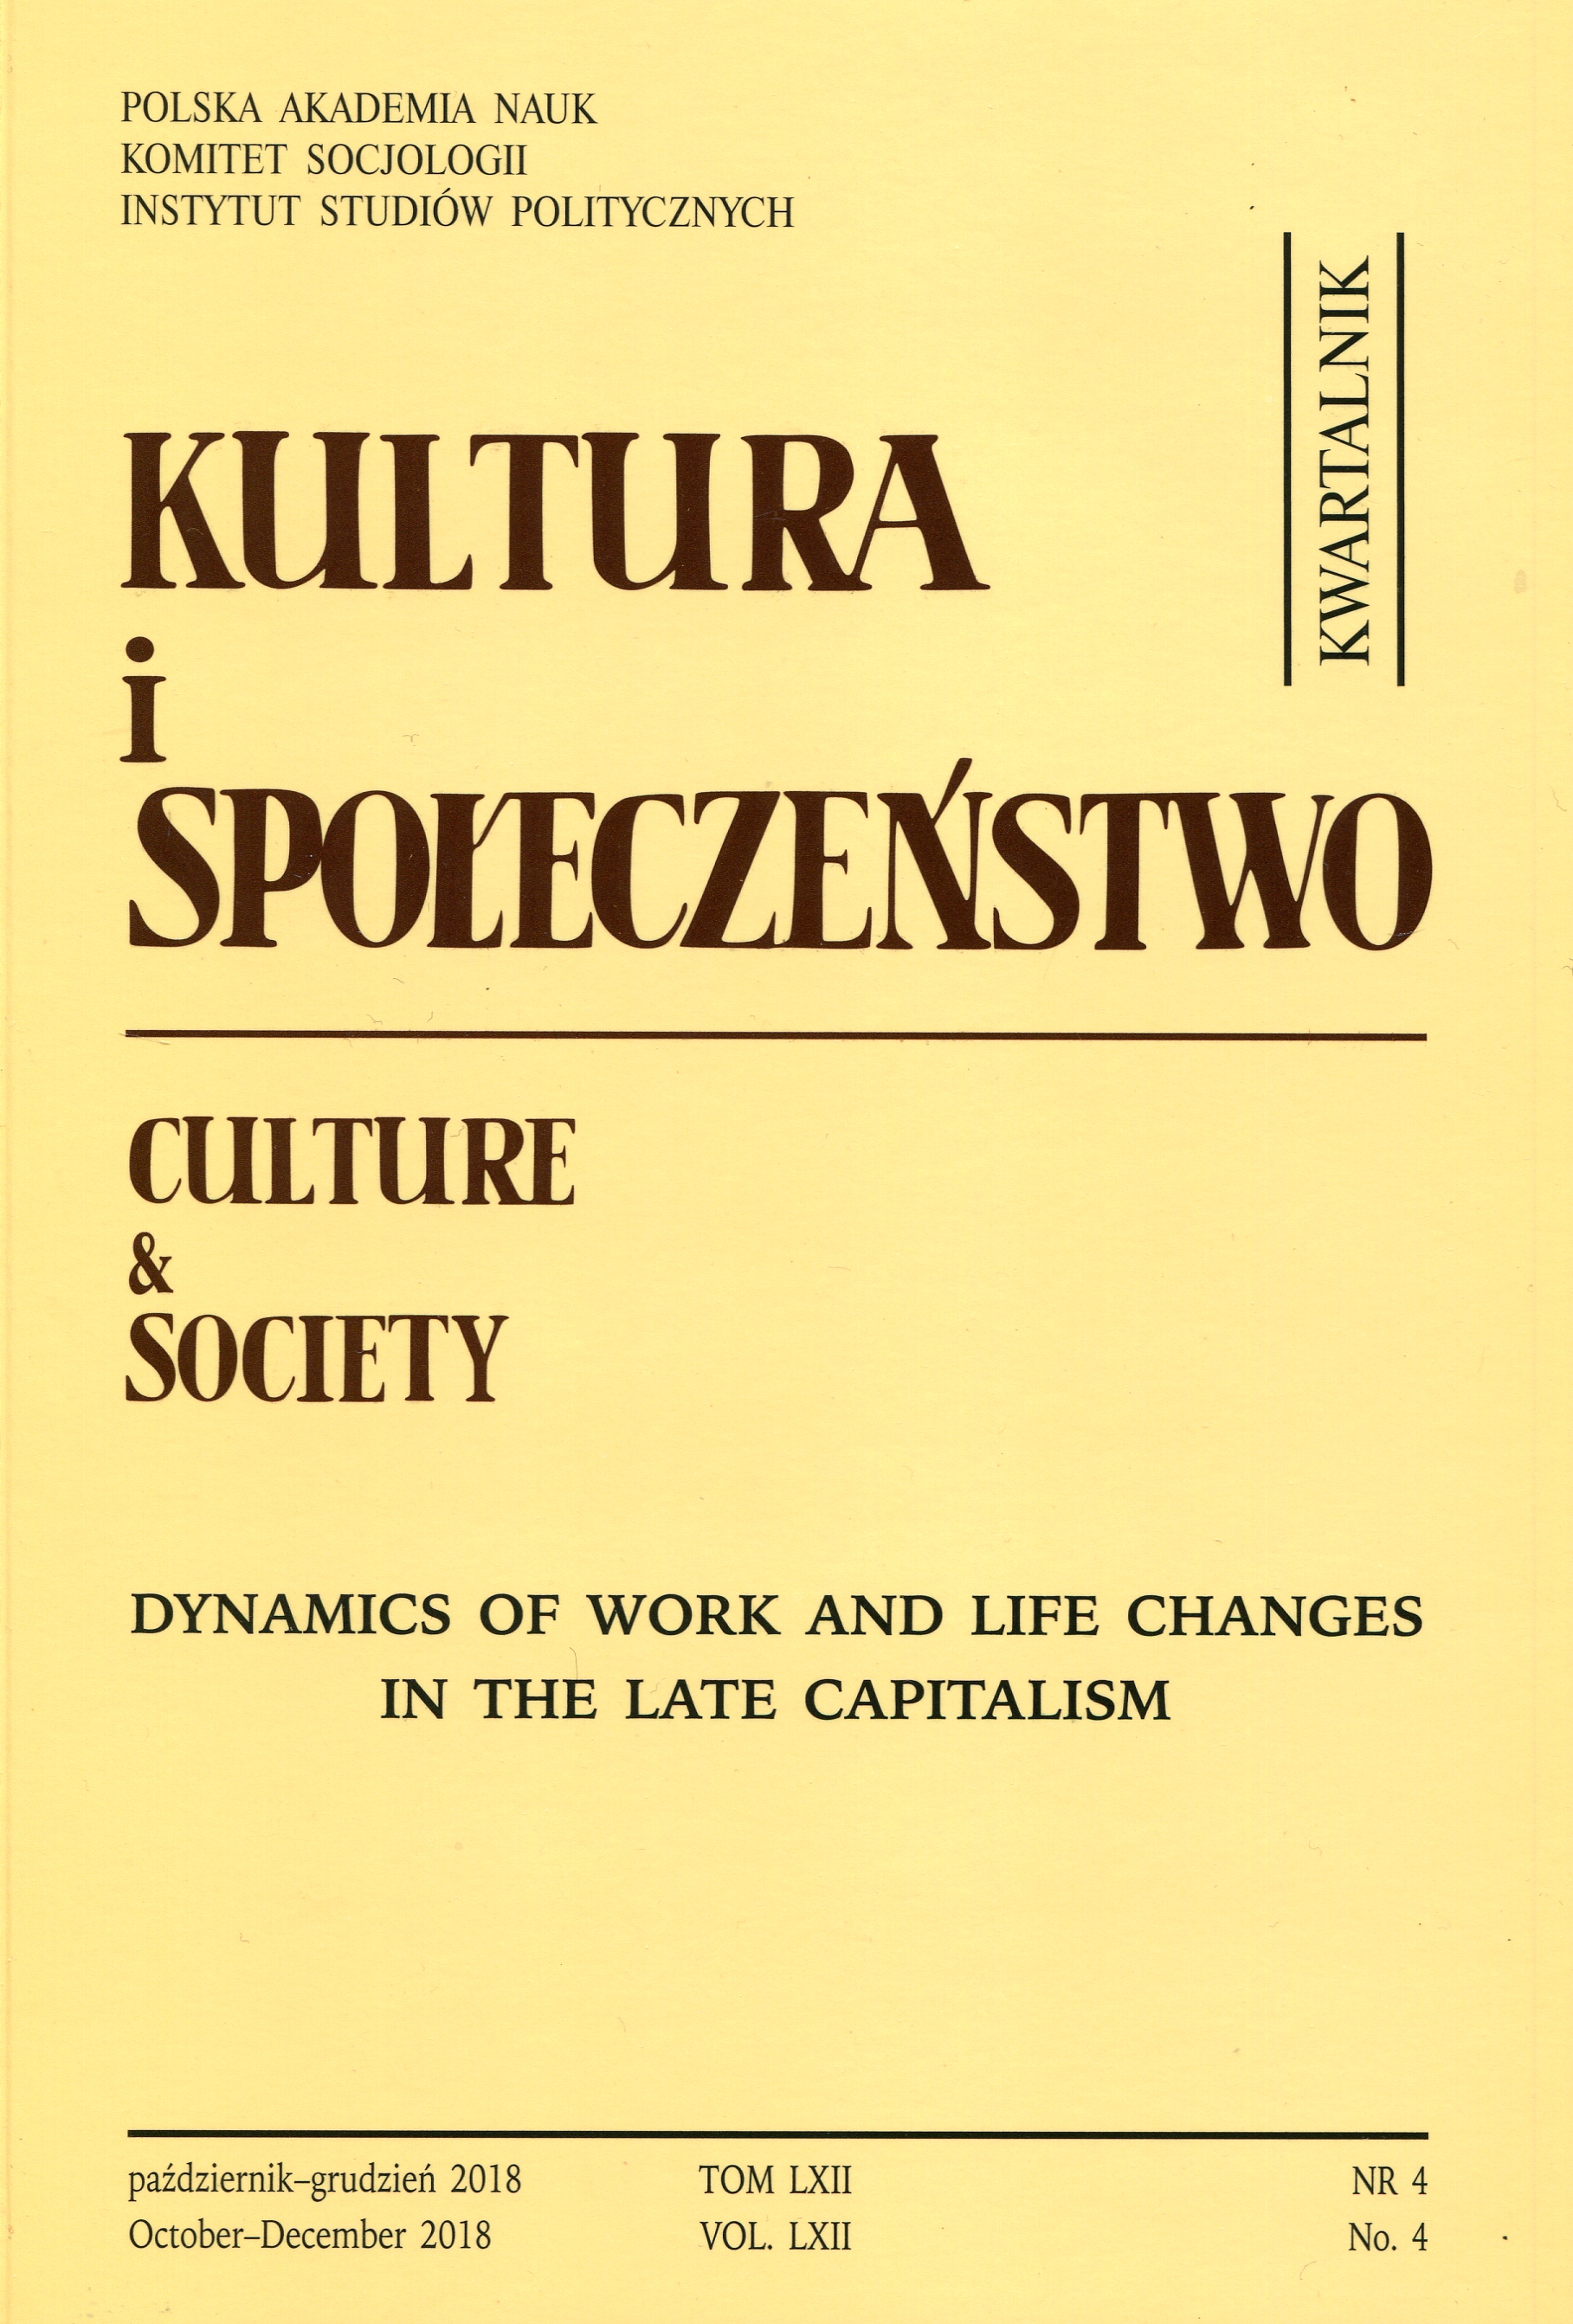 Transnational Contract Work and the Remaking of Class among Polish Workers in Construction and Shipyards: Between Collective Subjugation and Stratified Empowerment Cover Image